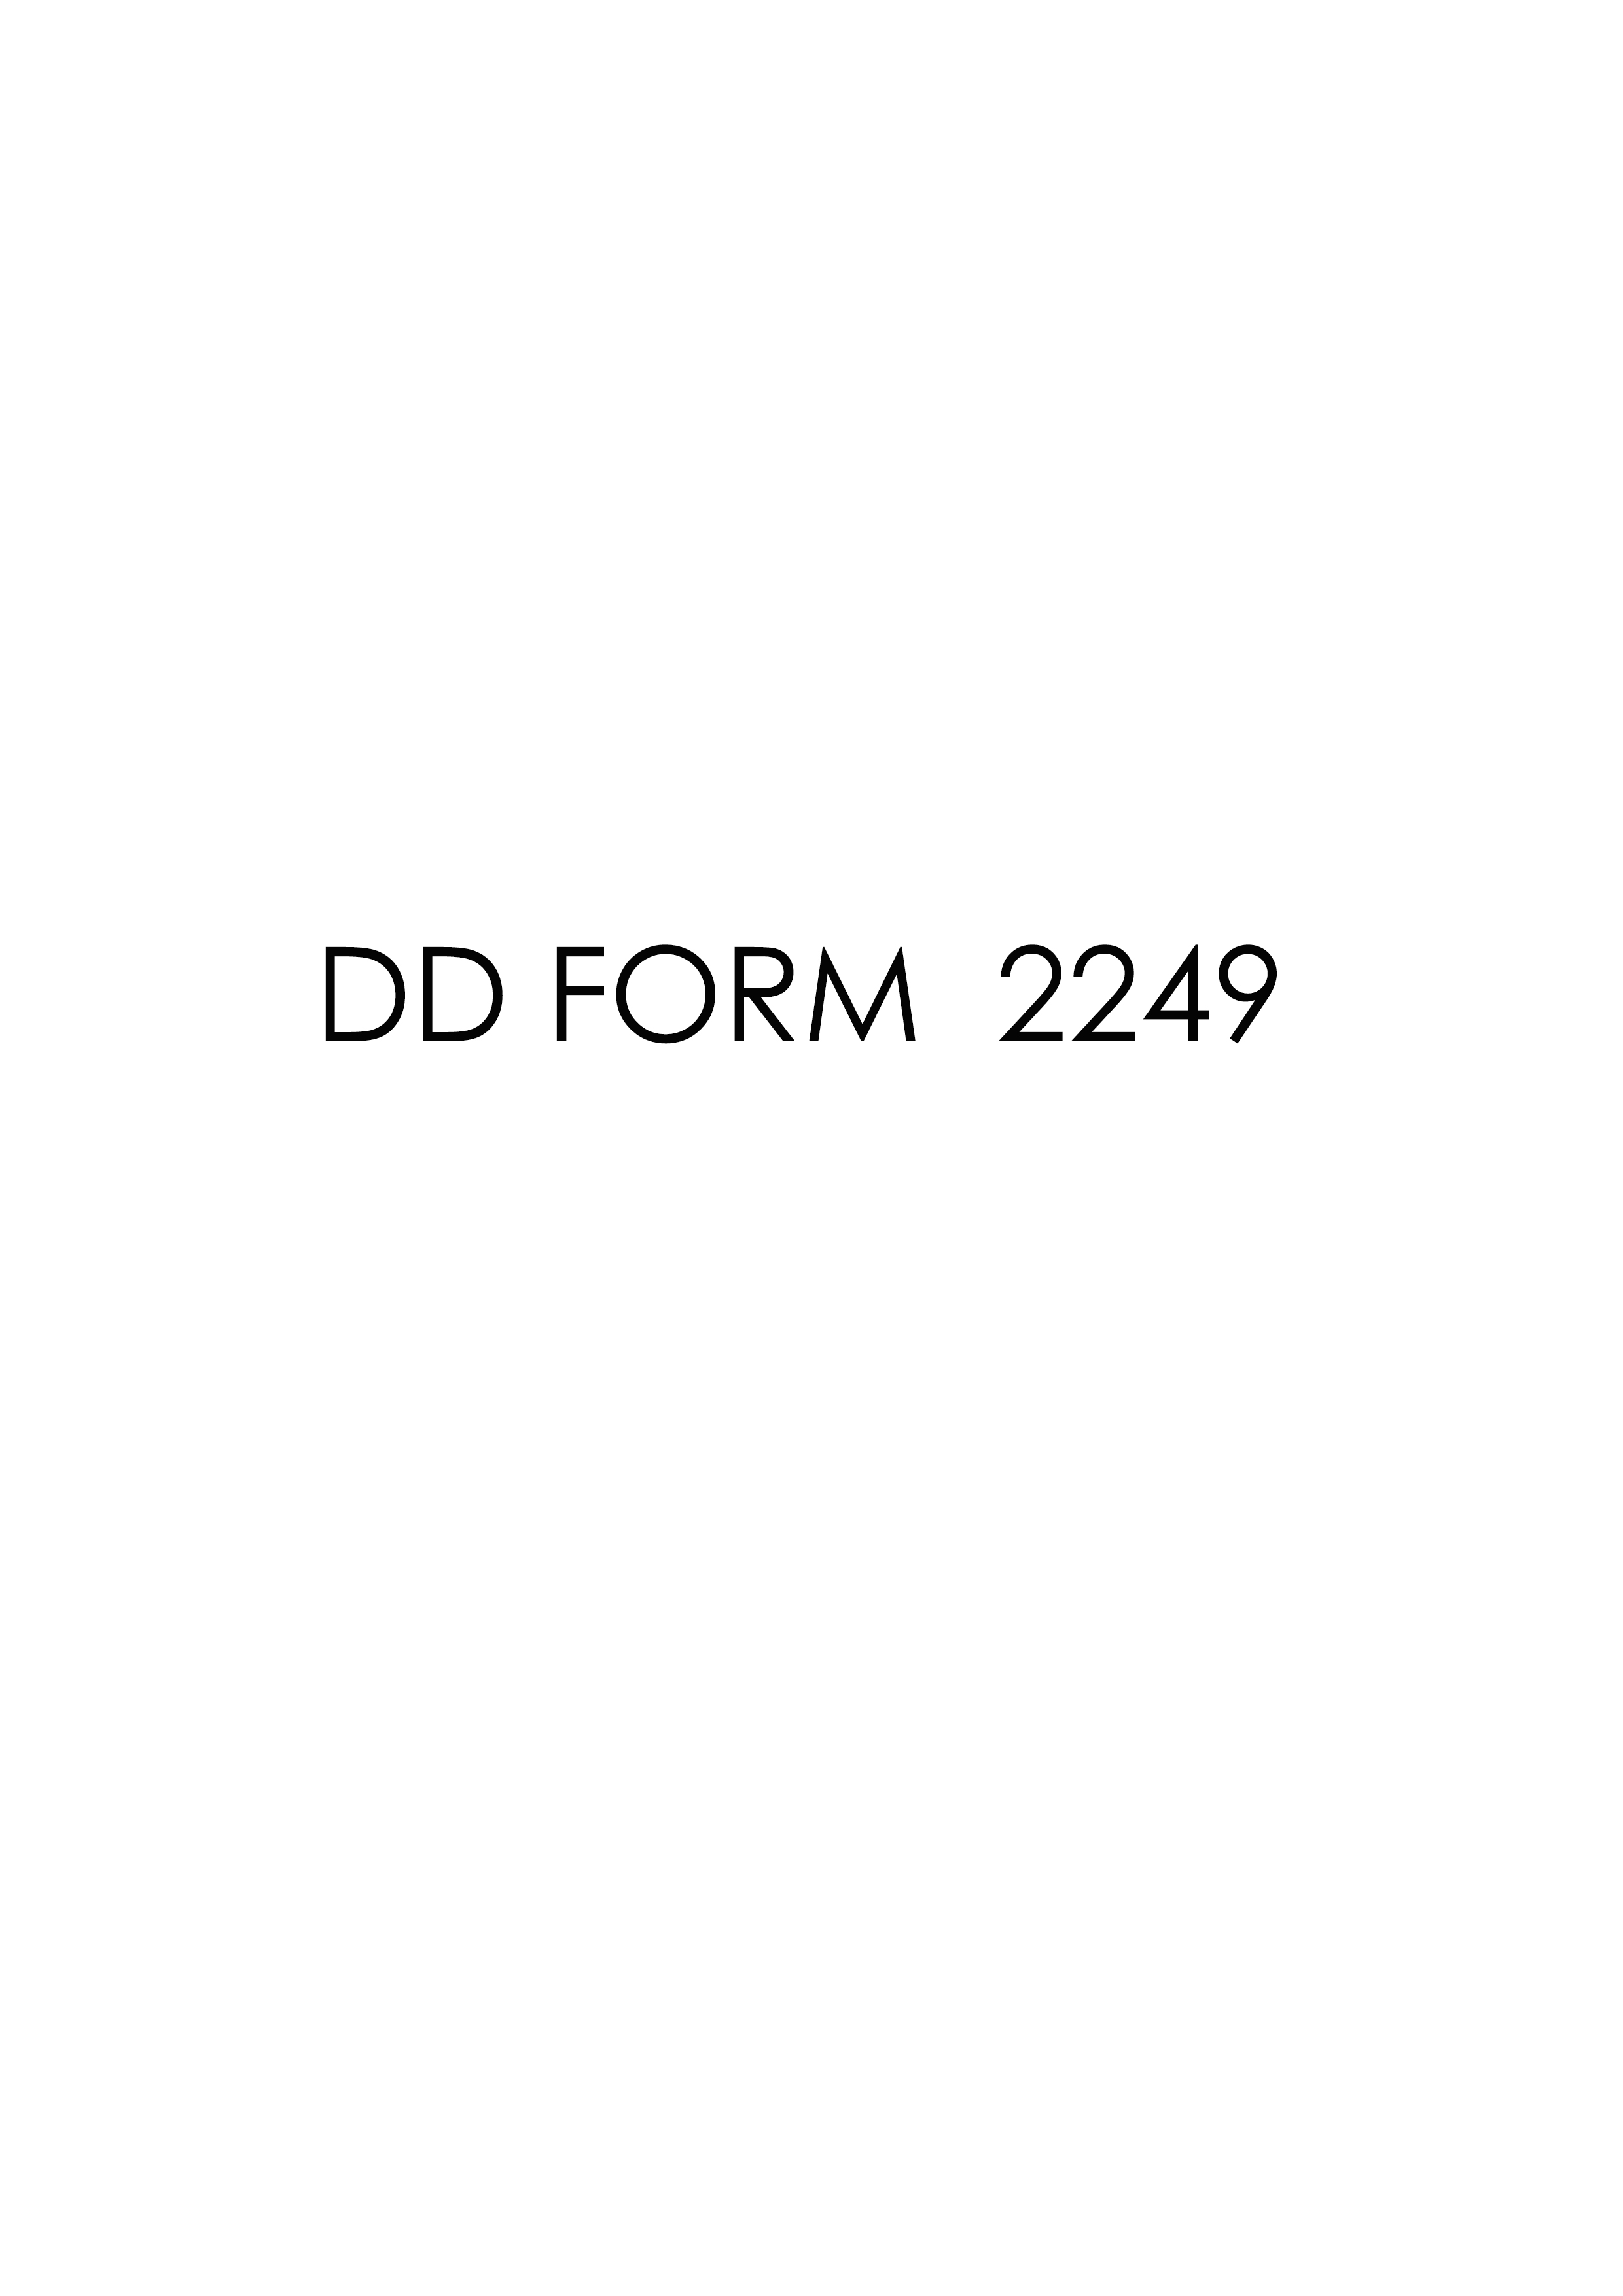 Download Fillable dd Form 2249